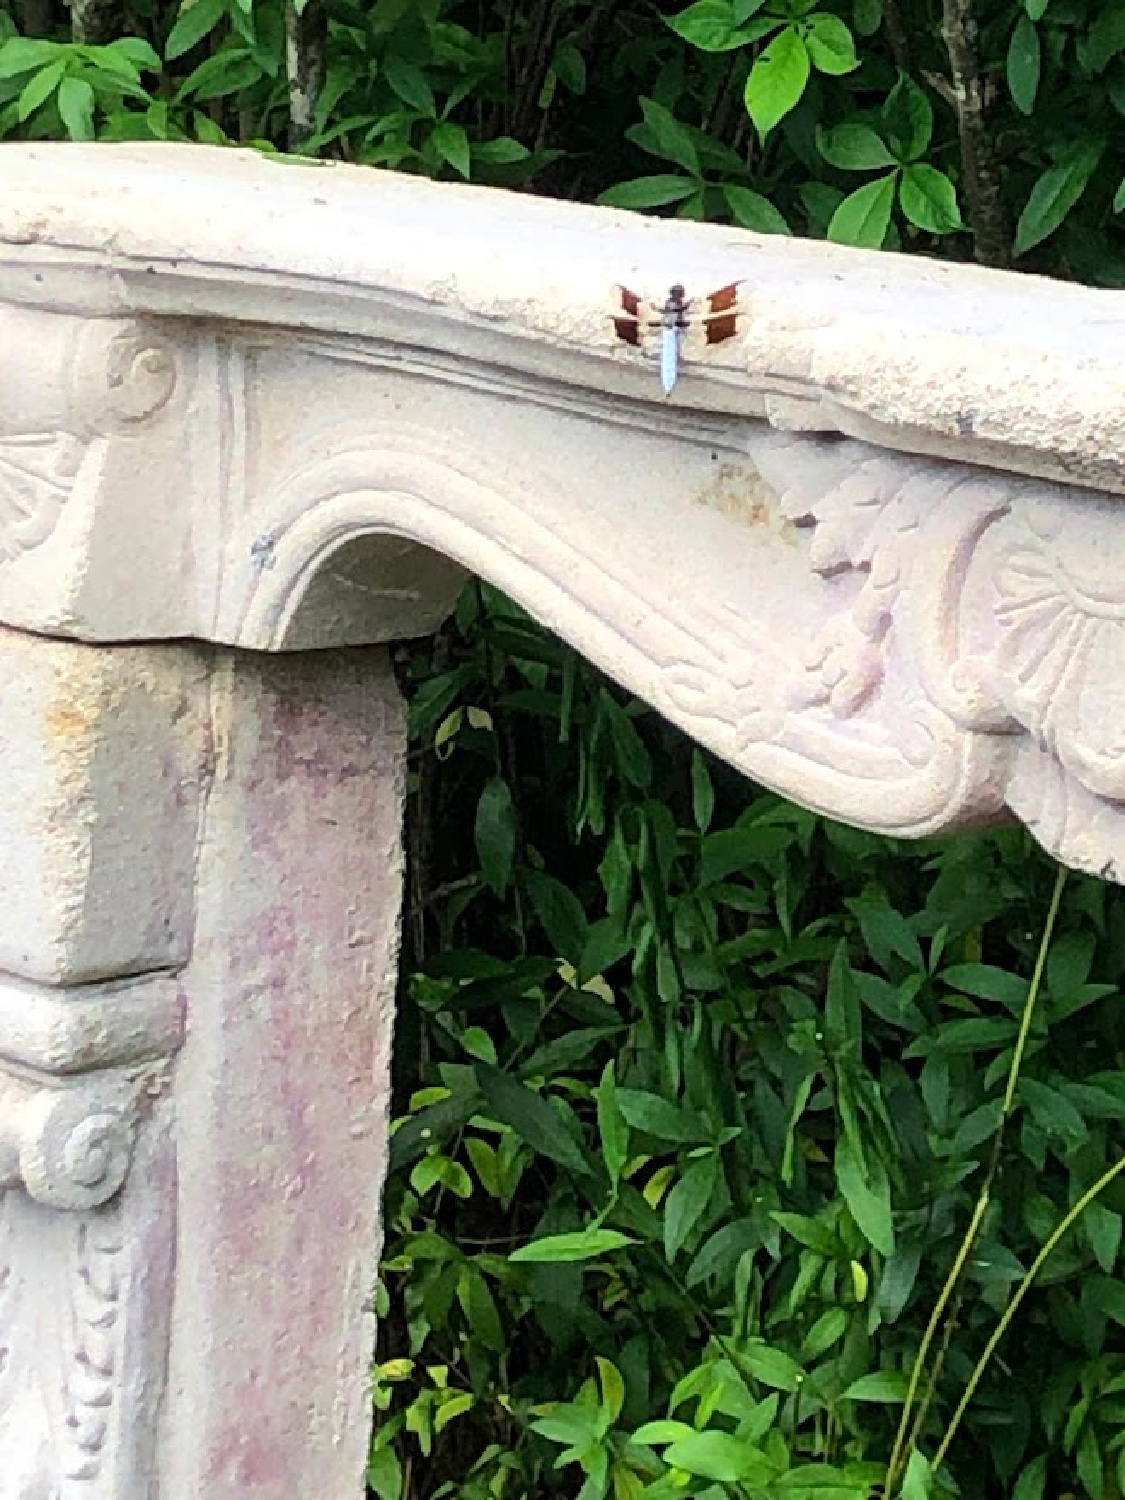 Dragonfly on the fireplace mantel in our secret garden courtyard - Hello Lovely Studio.